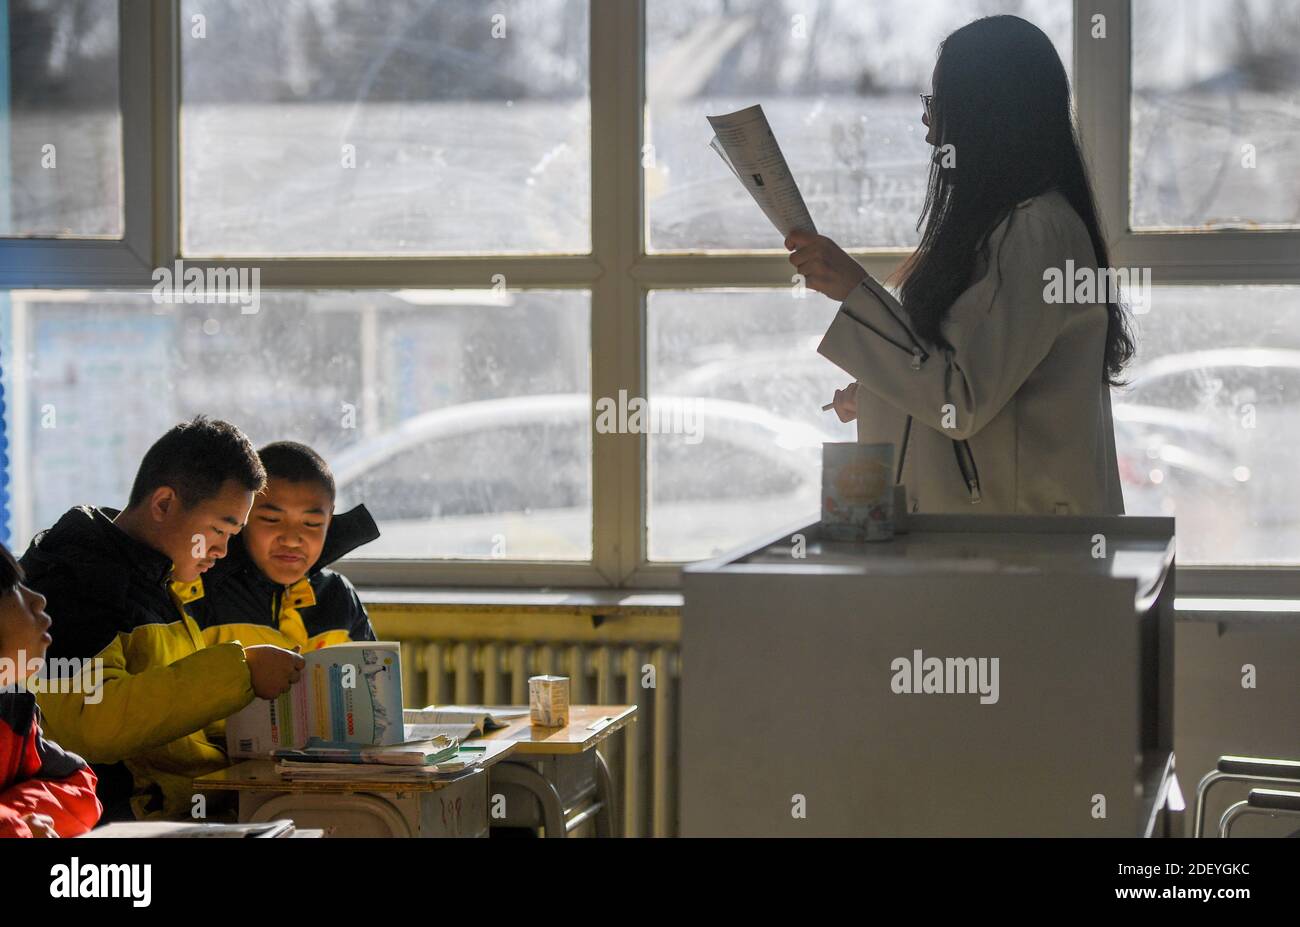 (201202) -- CHIFENG, Dec. 2, 2020 (Xinhua) -- Sun Simiao (1st, L) and Wang Aoran (2nd, L) are at class in the school in Chifeng City, north China's Inner Mongolia Autonomous Region, Nov. 25, 2020. Wang Aoran, 15, has been disabled in action by creatine kinase abnormality since he was a child. When in the second grade of primary school, he received help from schoolmate Sun Simiao, who voluntarily began to carry him from the school gate to his classroom. He has been helping him ever since. The two became inseparable best friends. They went to the same middle school, both in the same class Stock Photo